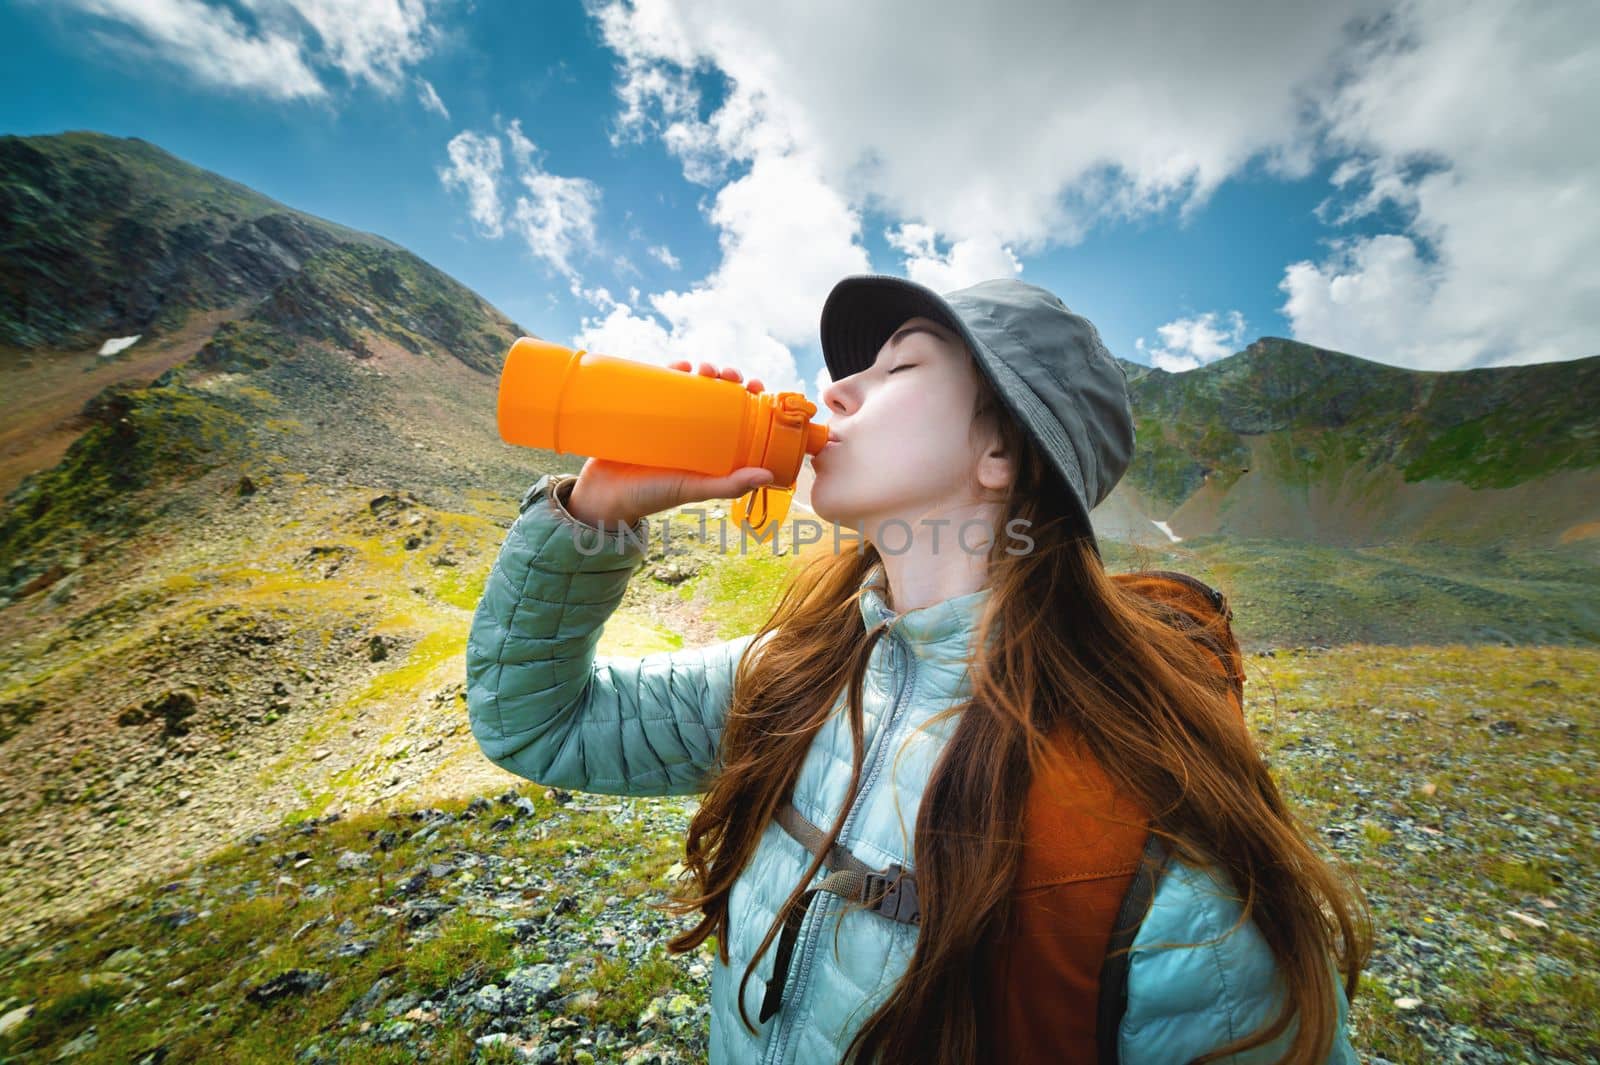 Profile photo of a young beautiful woman with long hair, wearing a jacket and a panama hat with a backpack, drinking from a yellow bottle, against the backdrop of a magnificent mountain landscape.